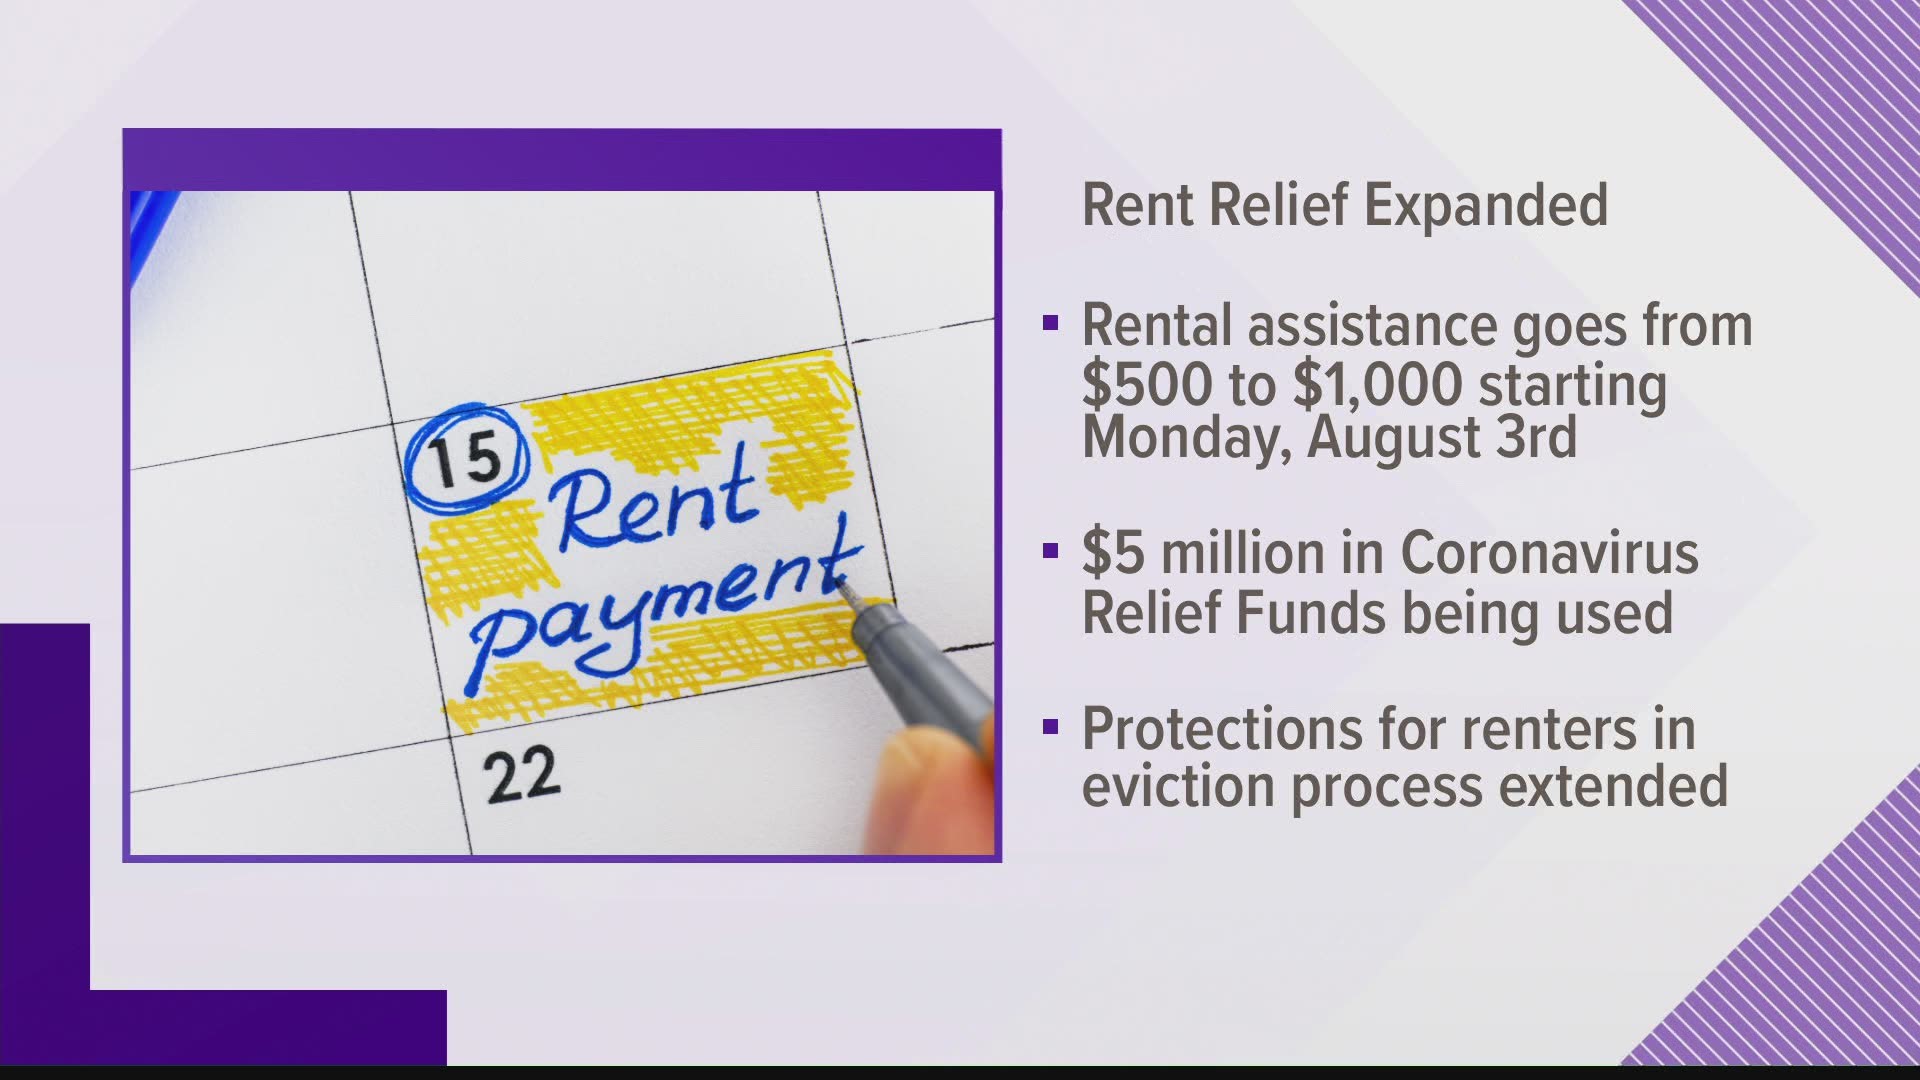 Maine's COVID-19 Rent Relief Program expanded to help prevent evictions